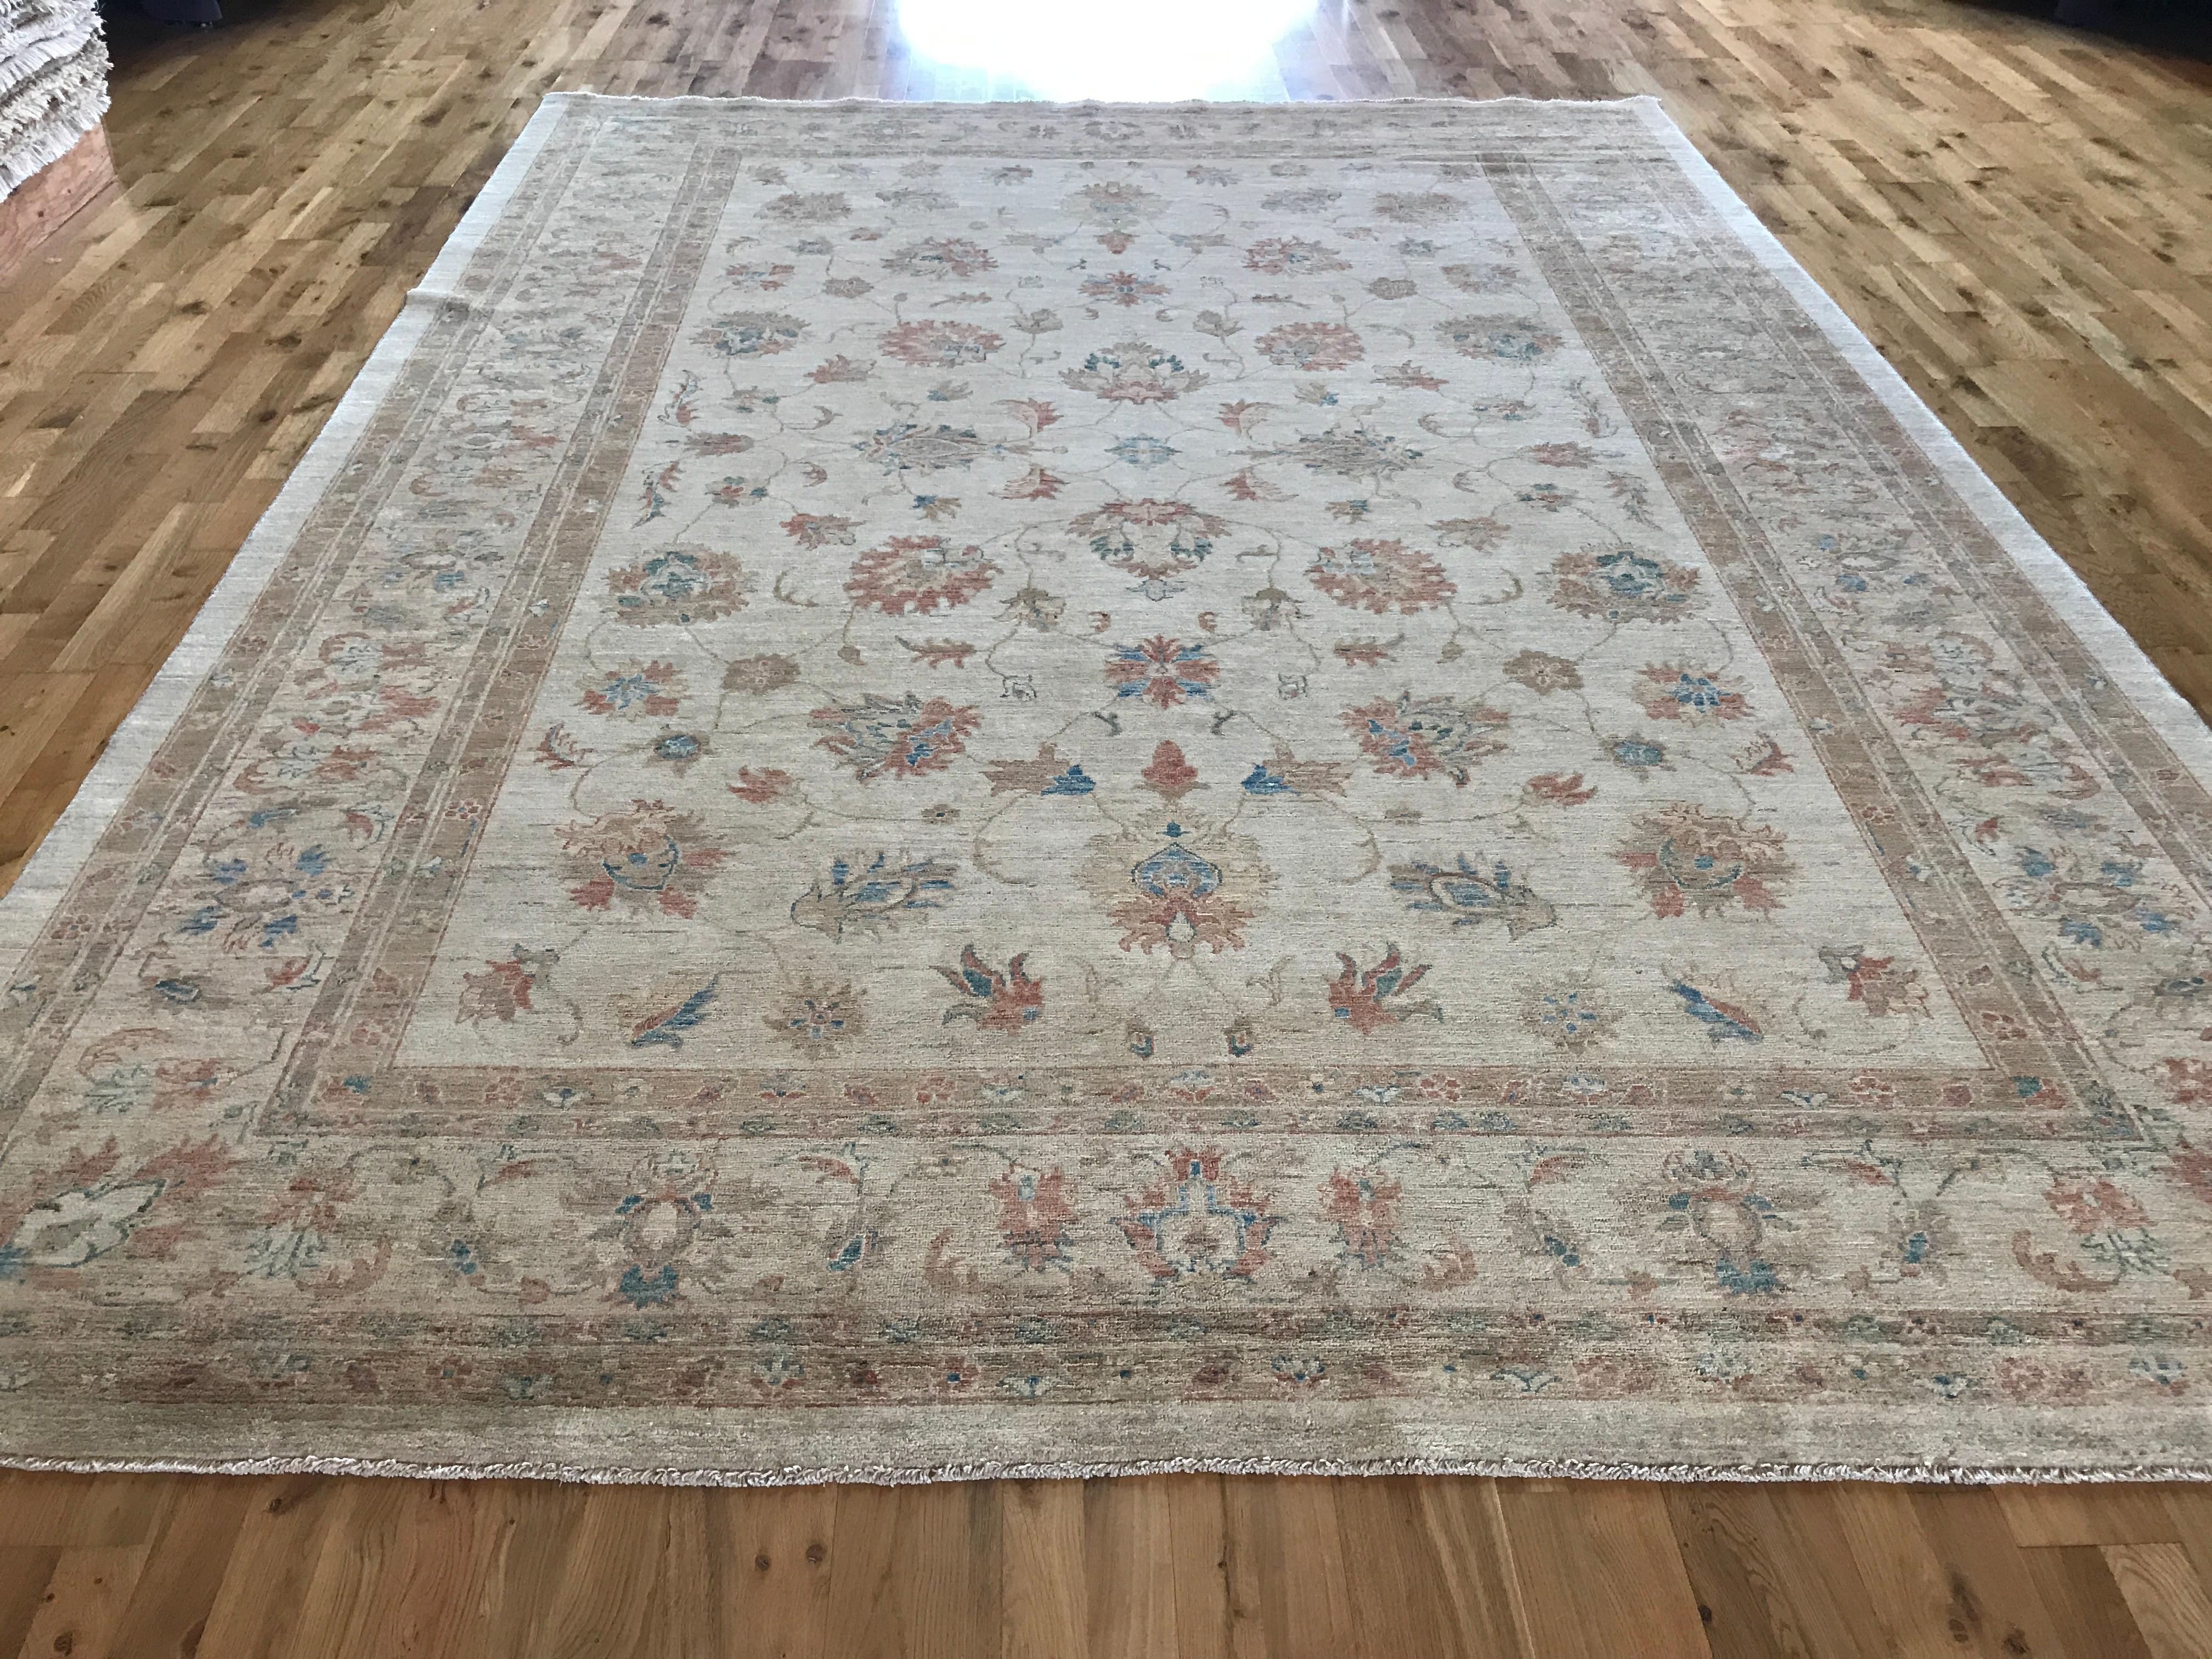 Lovely warm tan traditional style area rug with floral motif using teal, brown and rust colors. Durable all wool-construction. Hand knotted in Pakistan.